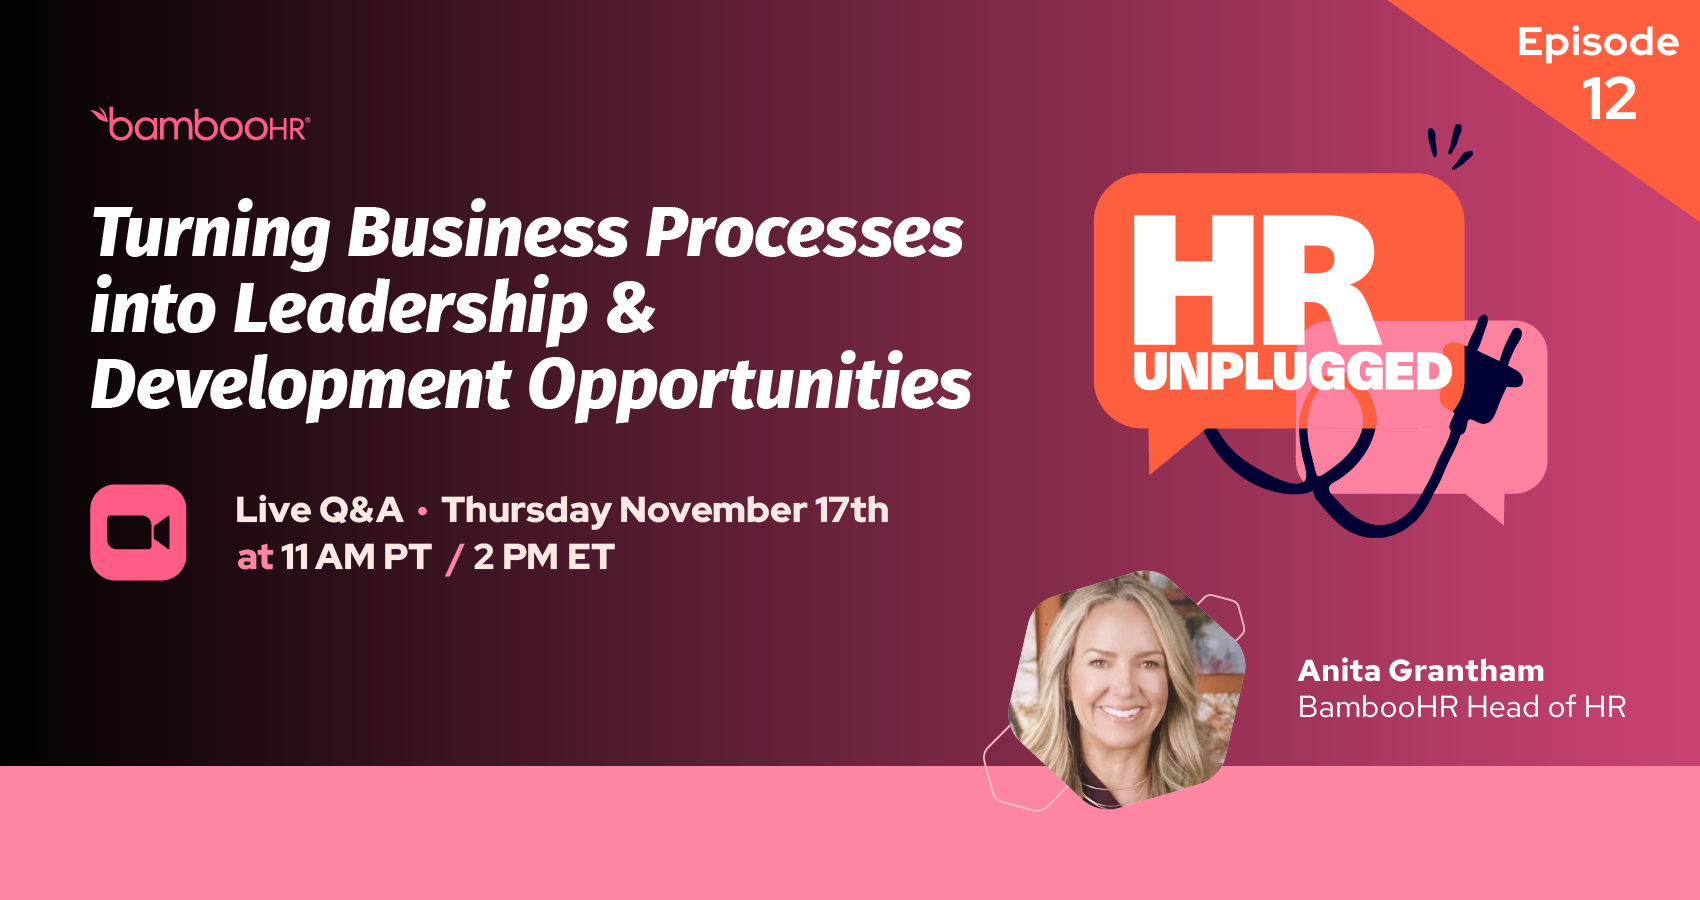 Episode 12: Turning Business Processes into Leadership & Development Opportunities